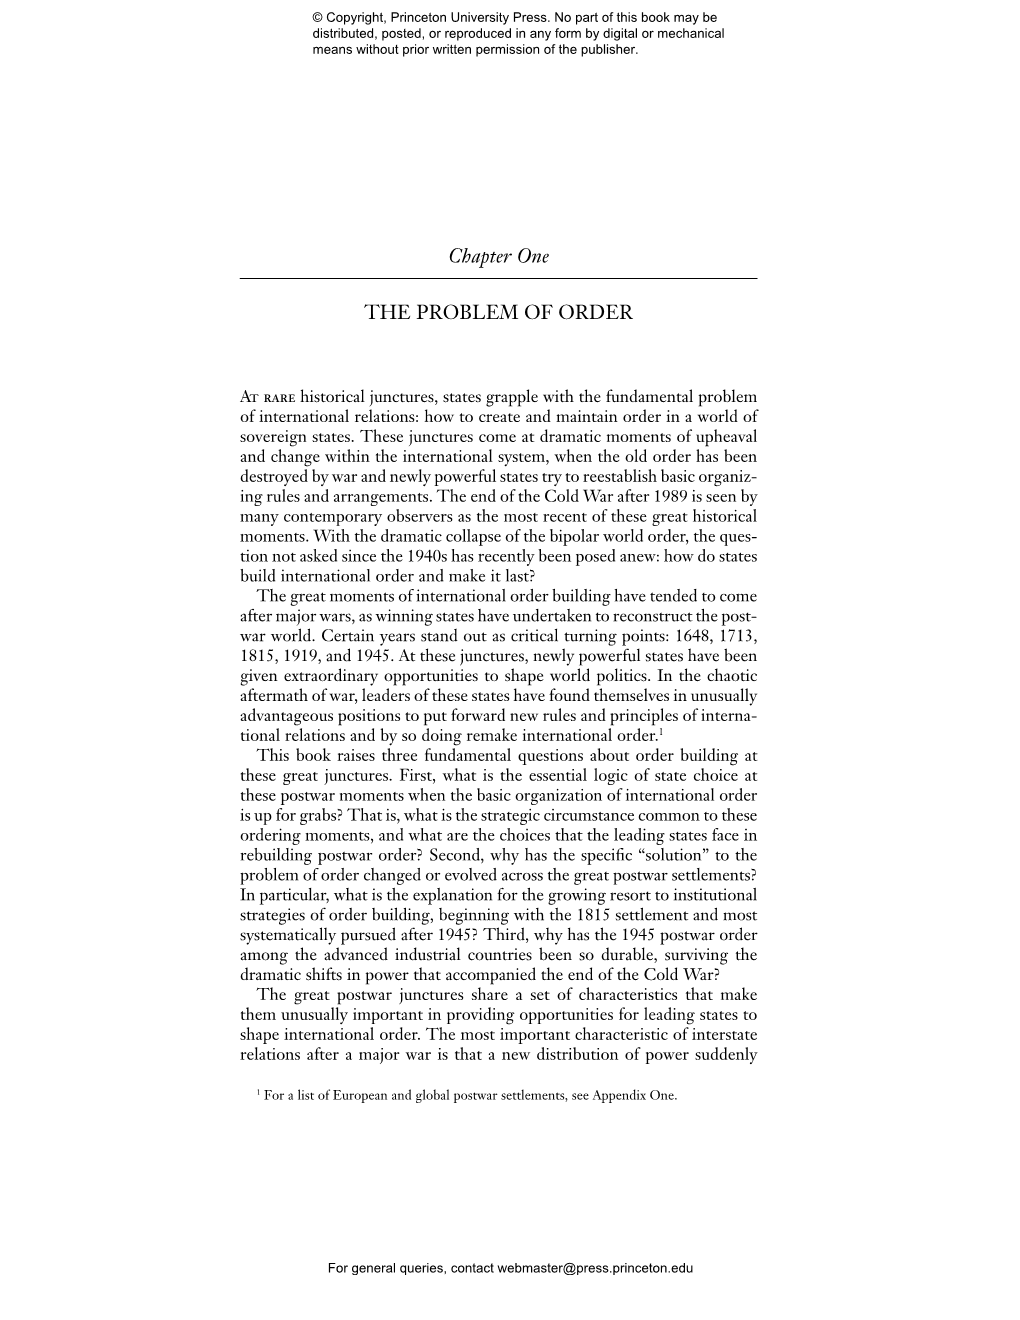 Chapter One the PROBLEM of ORDER